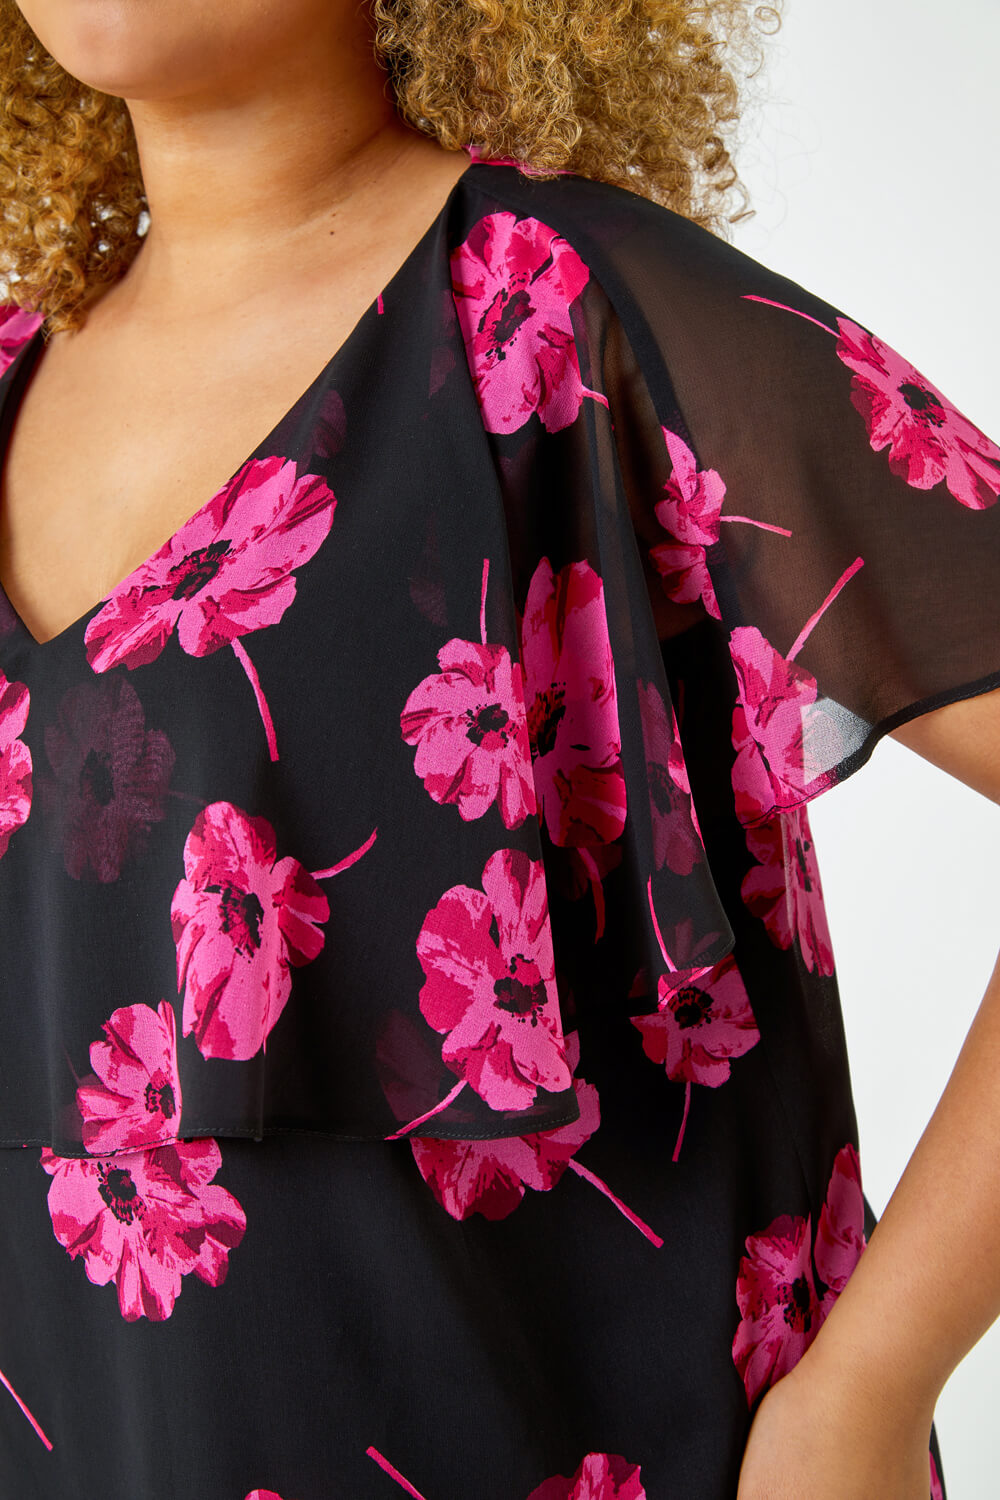 Fuchsia Curve Floral Chiffon Overlay Top, Image 5 of 5